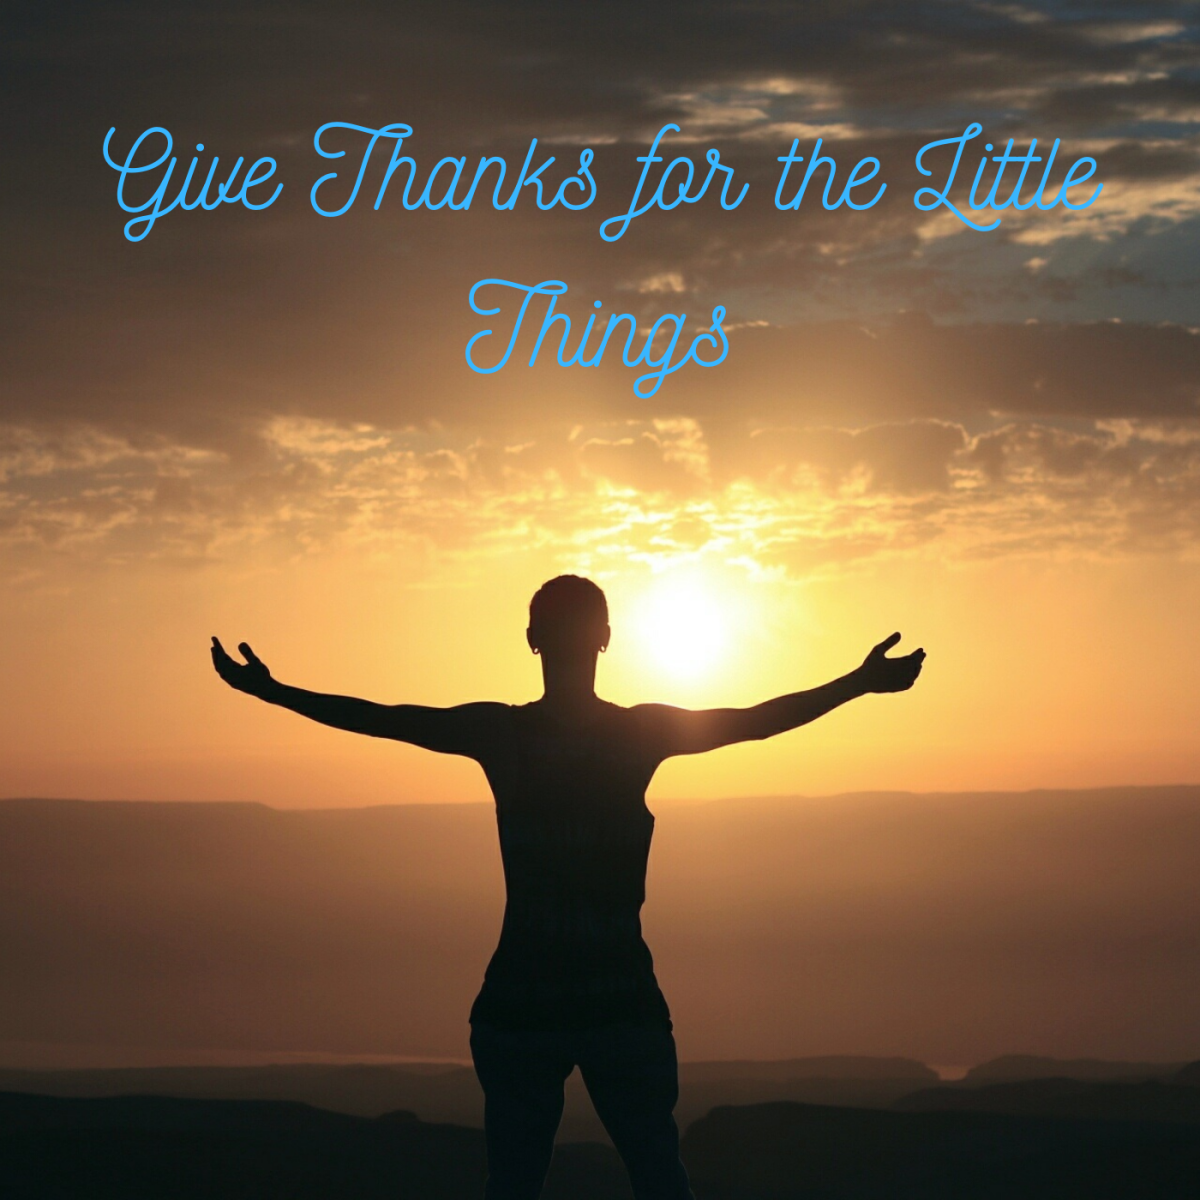 10 Things for Your Thanksgiving Gratitude List